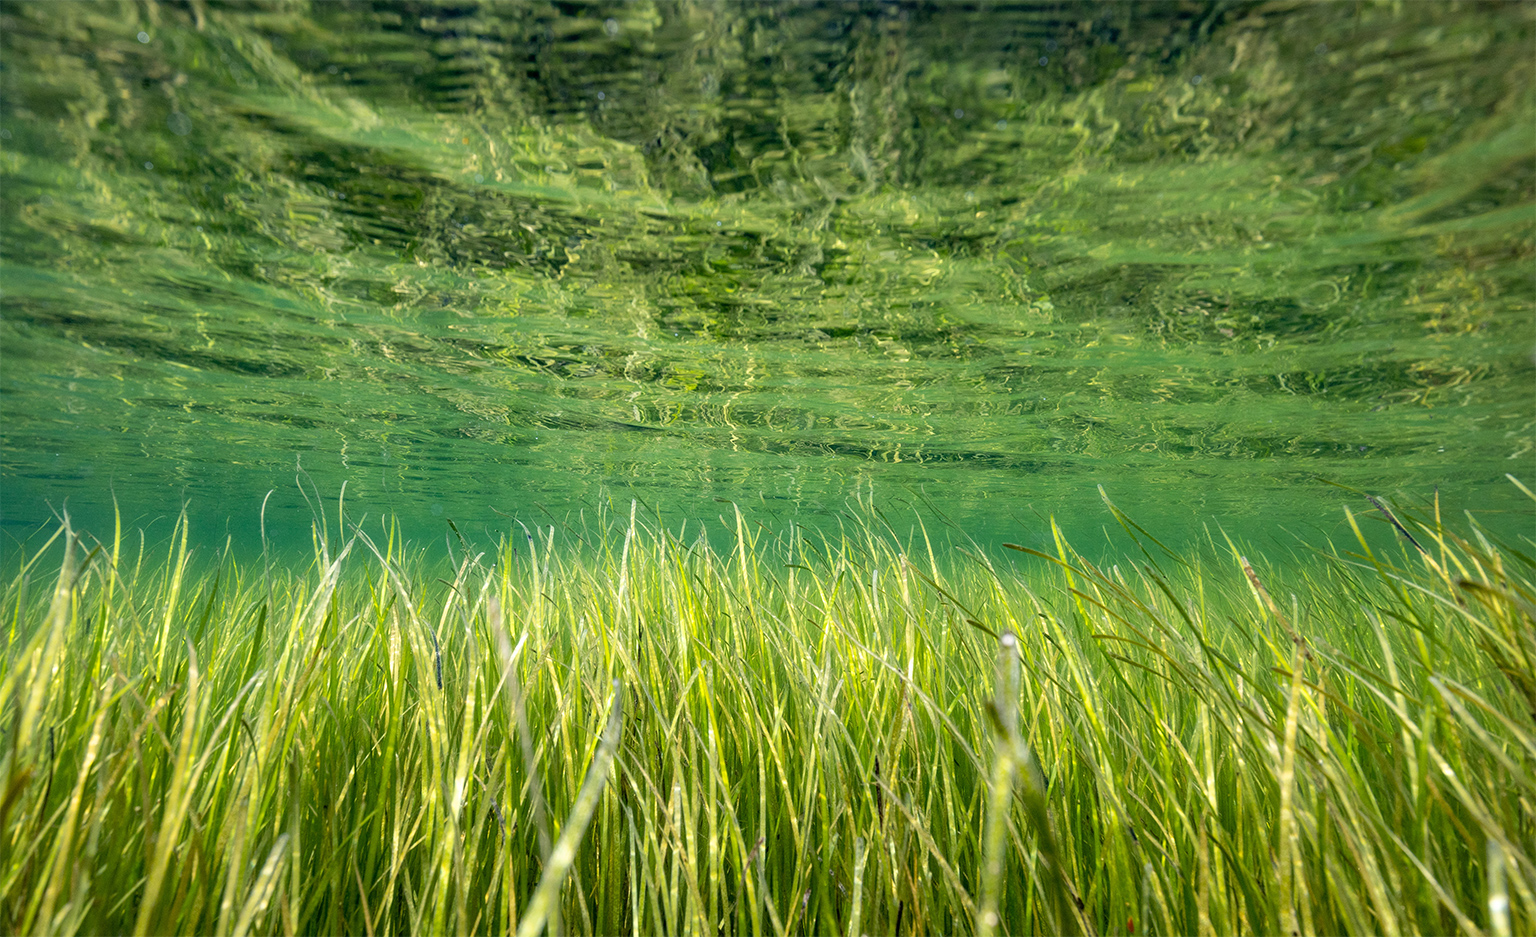 Eelgrass meadows support a range of species, including species of cultural significance for the Mi'kmaq such as American eel.